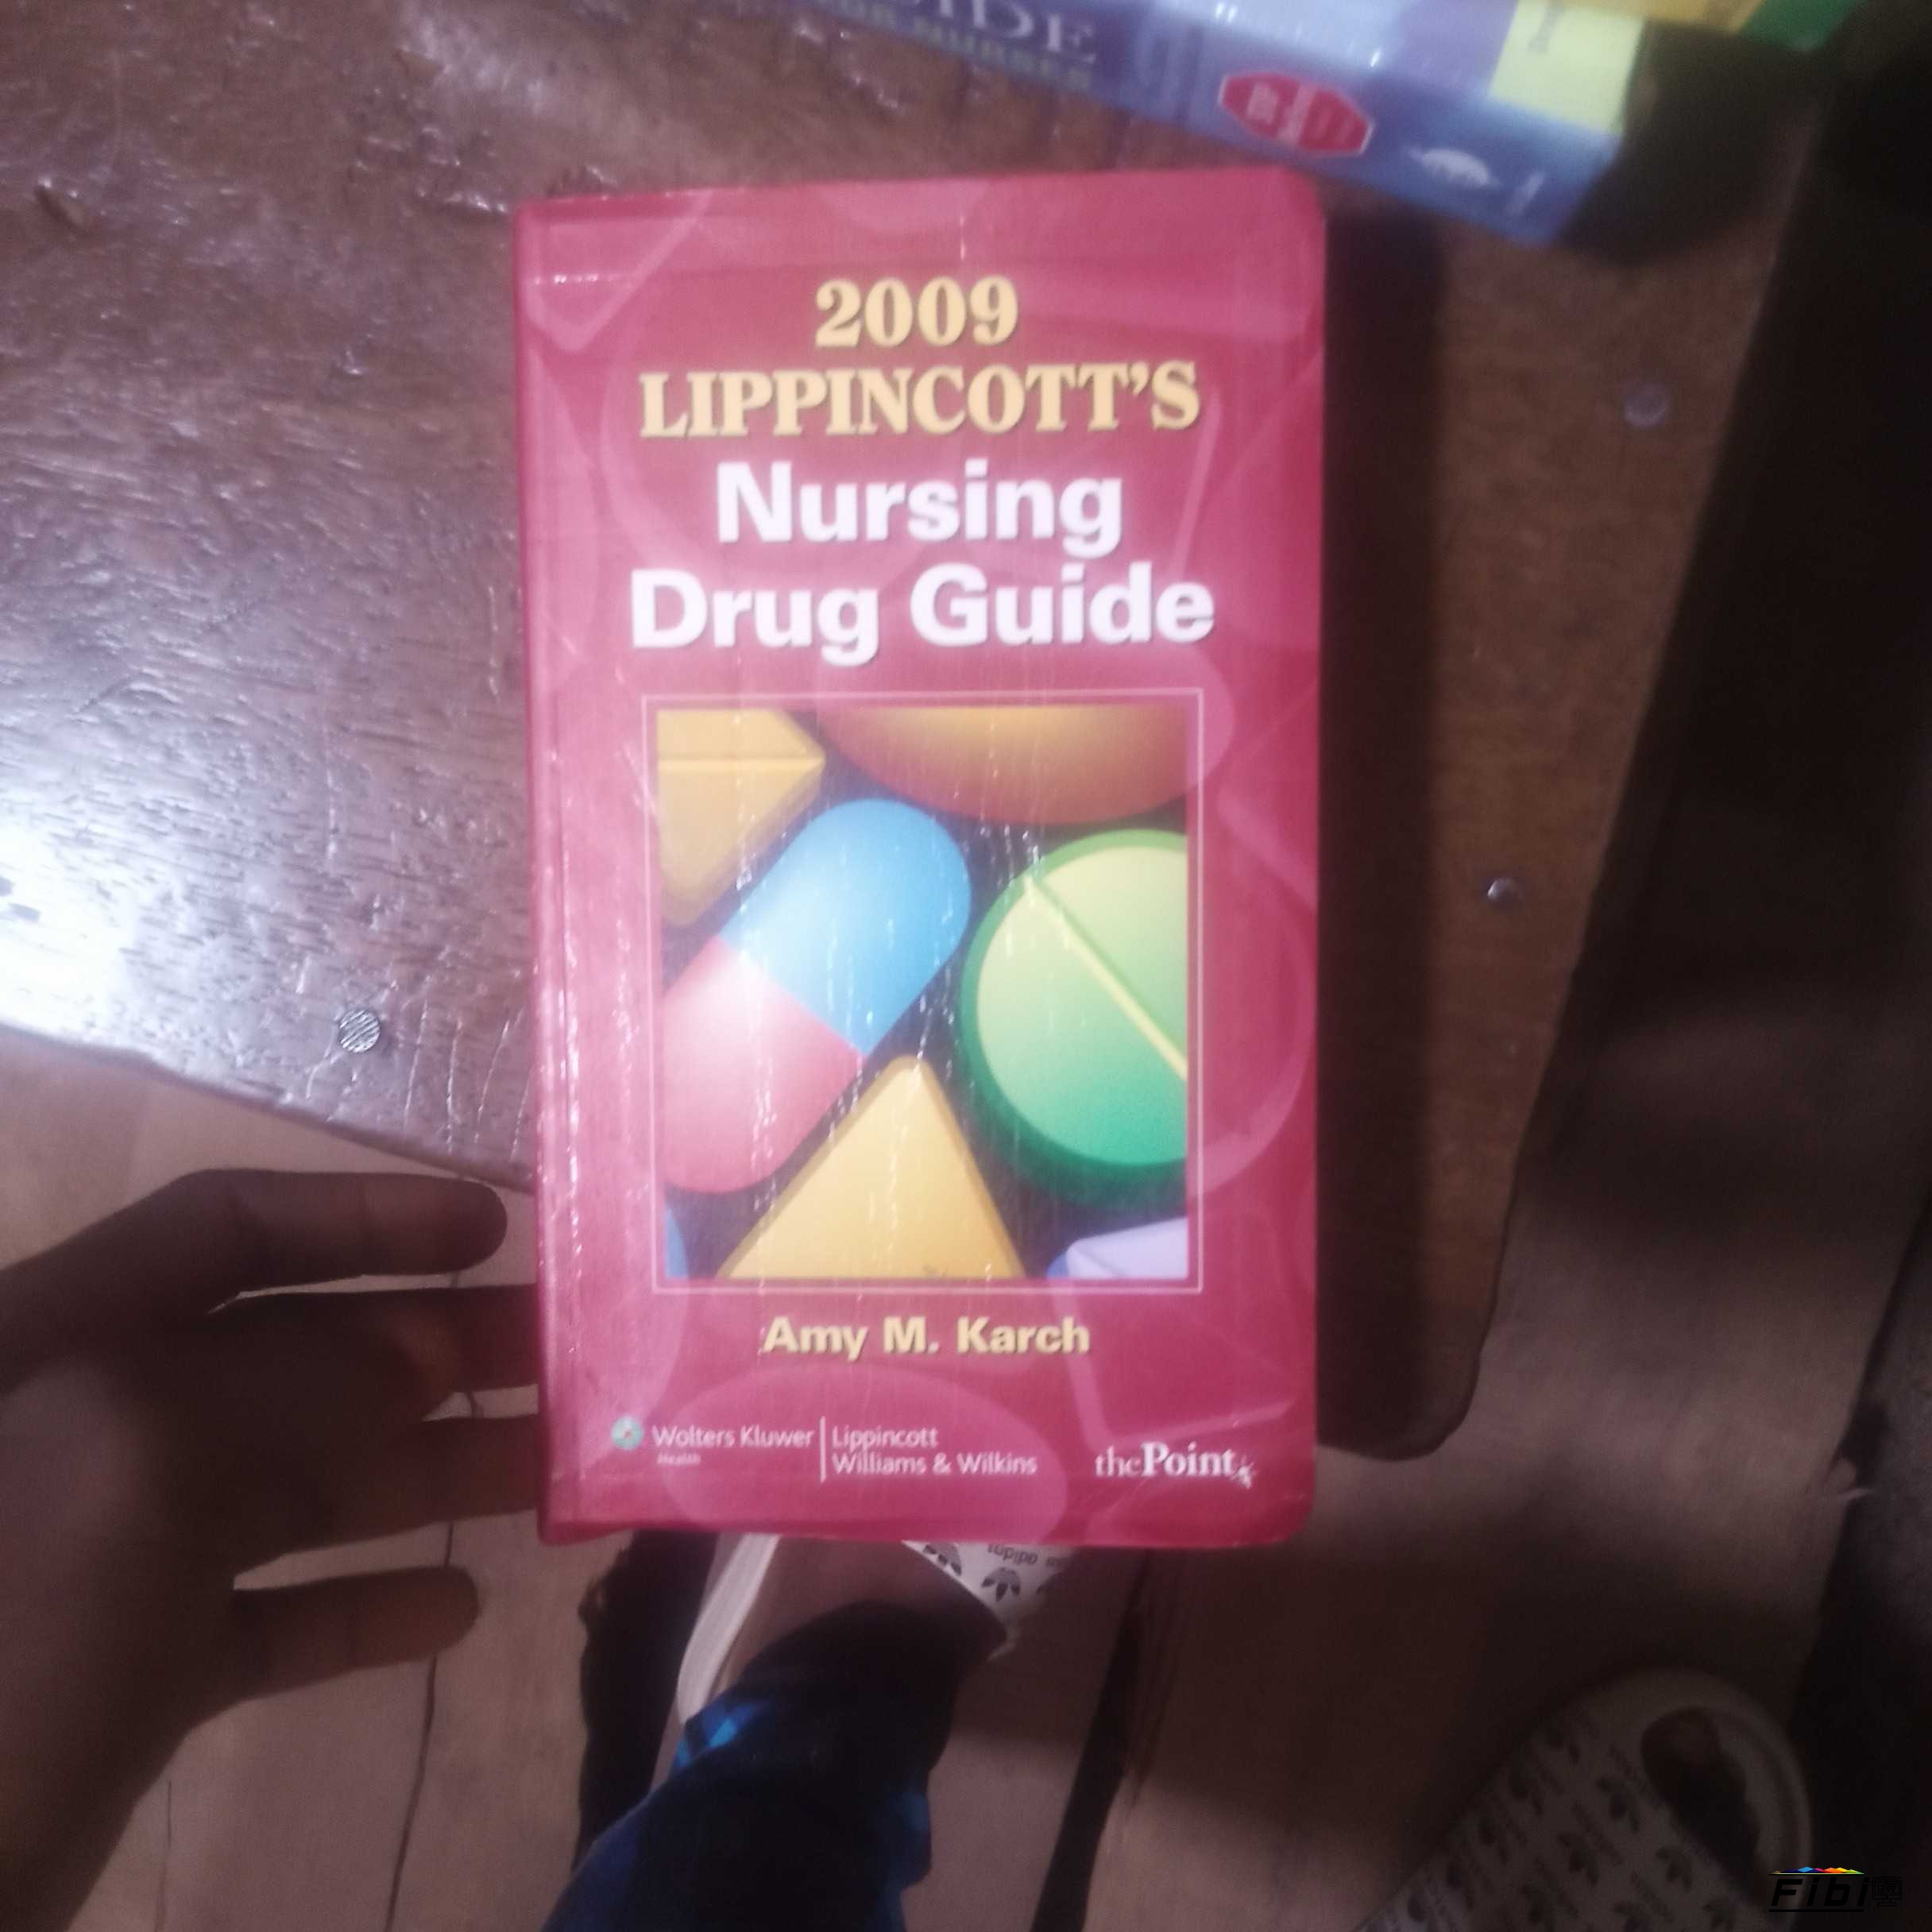 Pdfcoffee - 2020 Lippincott Pocket Drug Guide for Nurses by Amy M Karch  2020 Lippincott Pocket Drug - Studocu